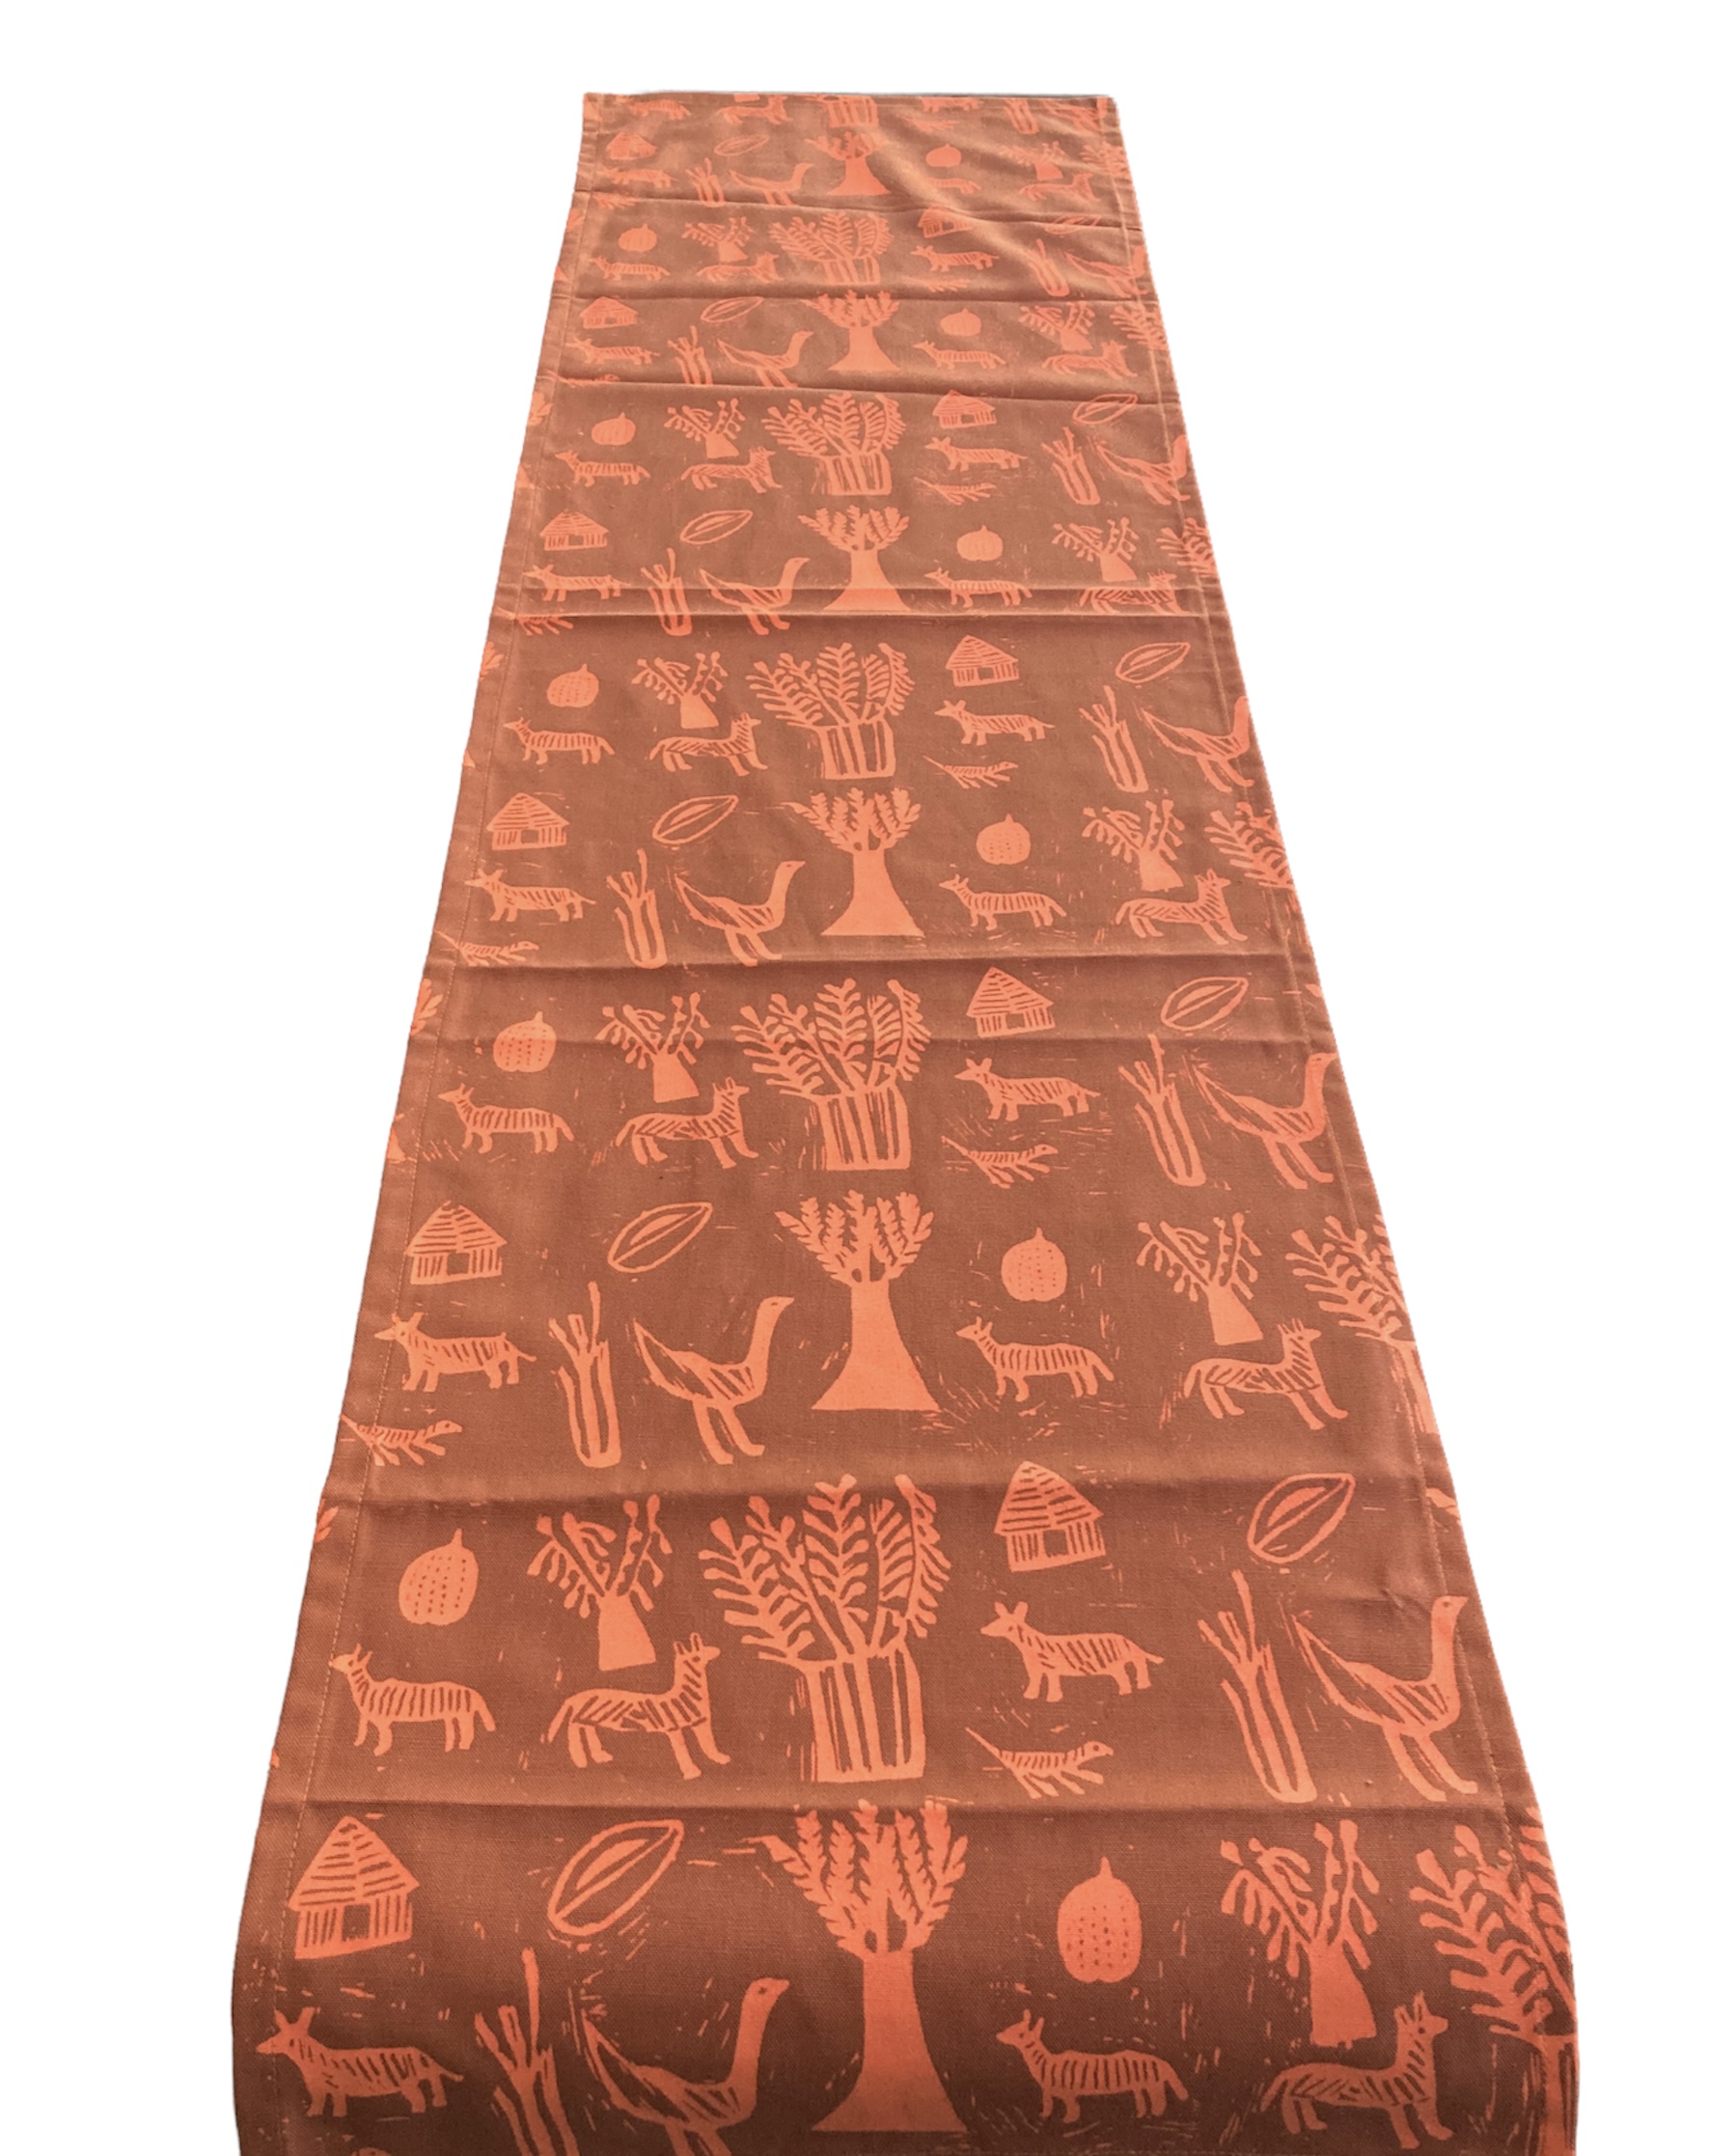 100% cotton Table Runner 58\" x 16\" from Namibia - Design 02s